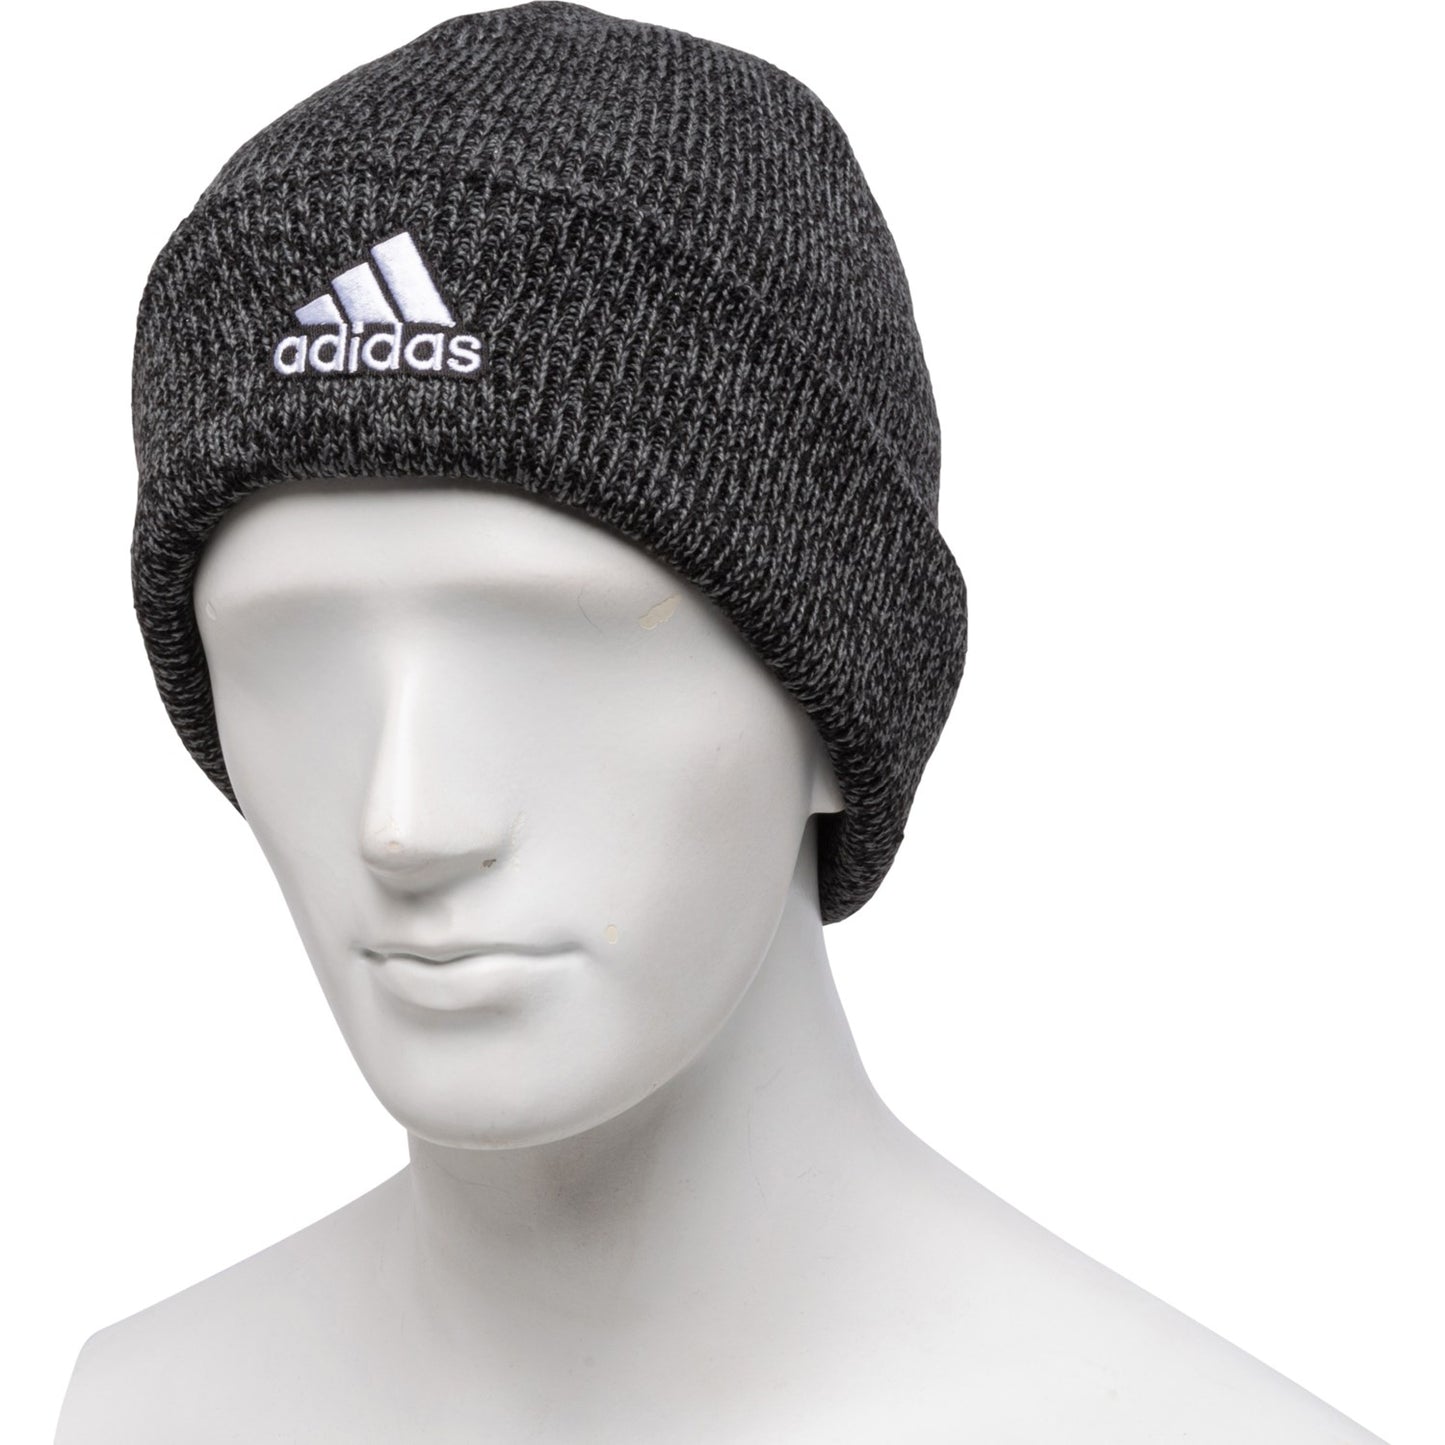 Adidas Men's Team Issue Fold Beanie Double Layer Soft Knit Winter Hat